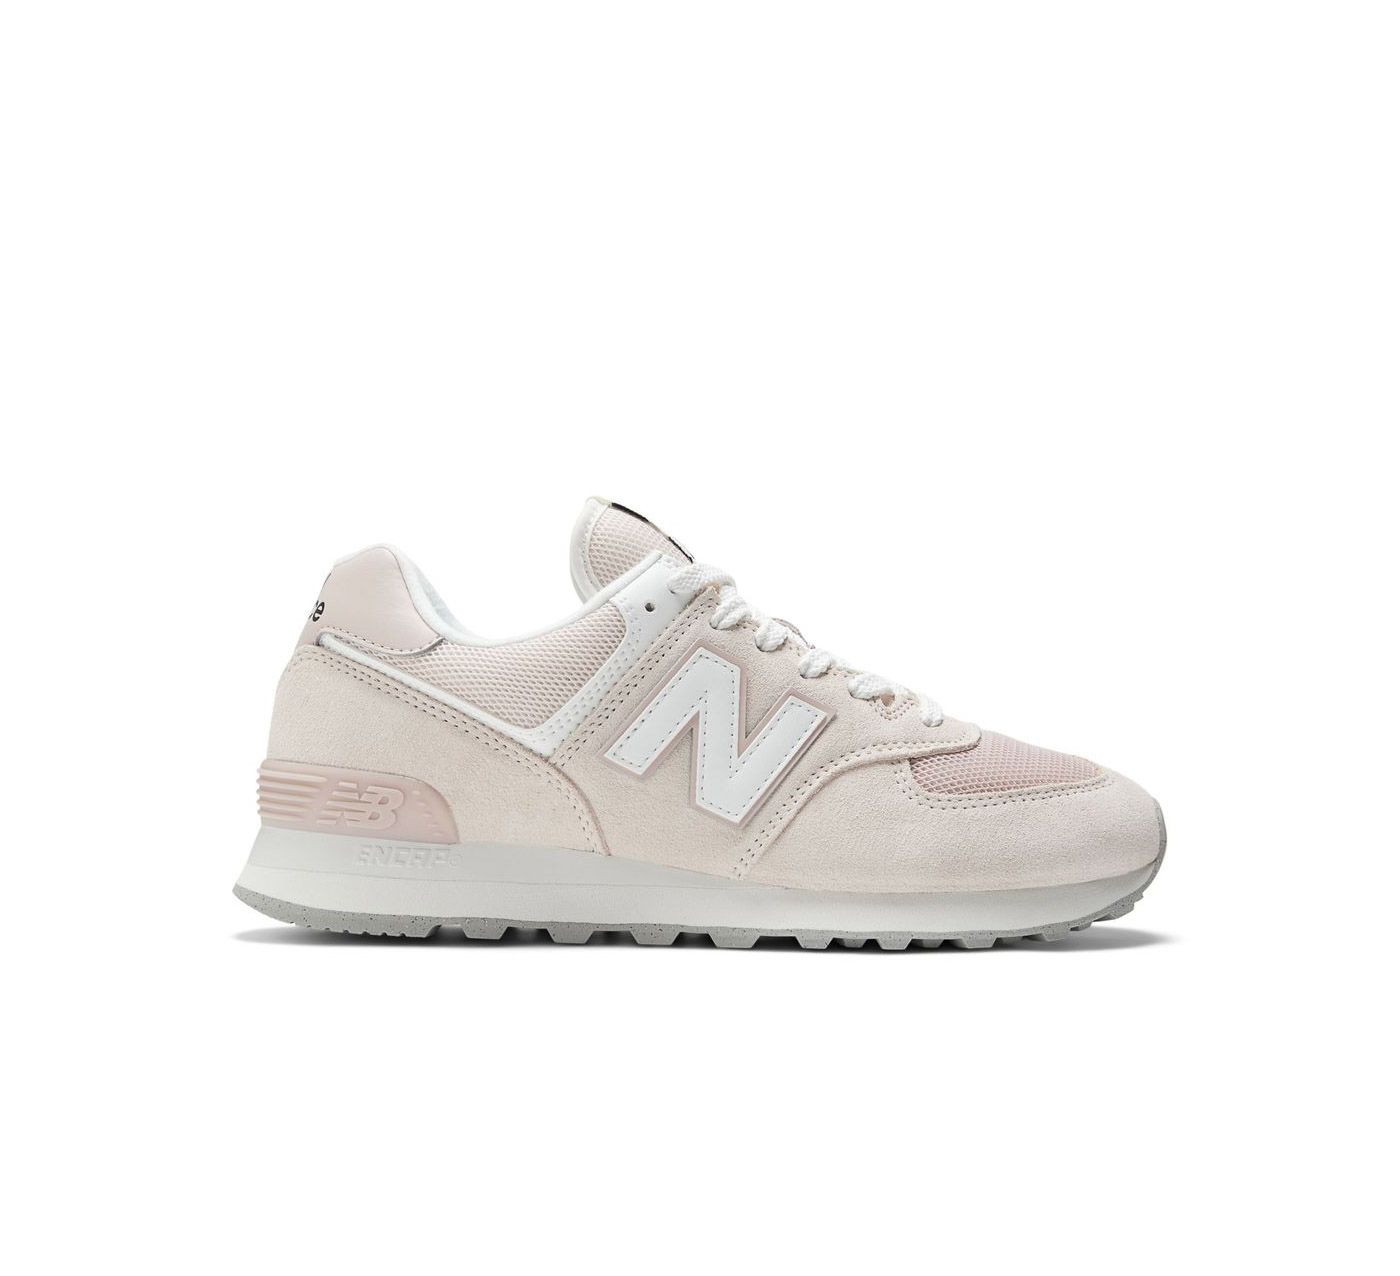 New Balance 574 trainers in light pink